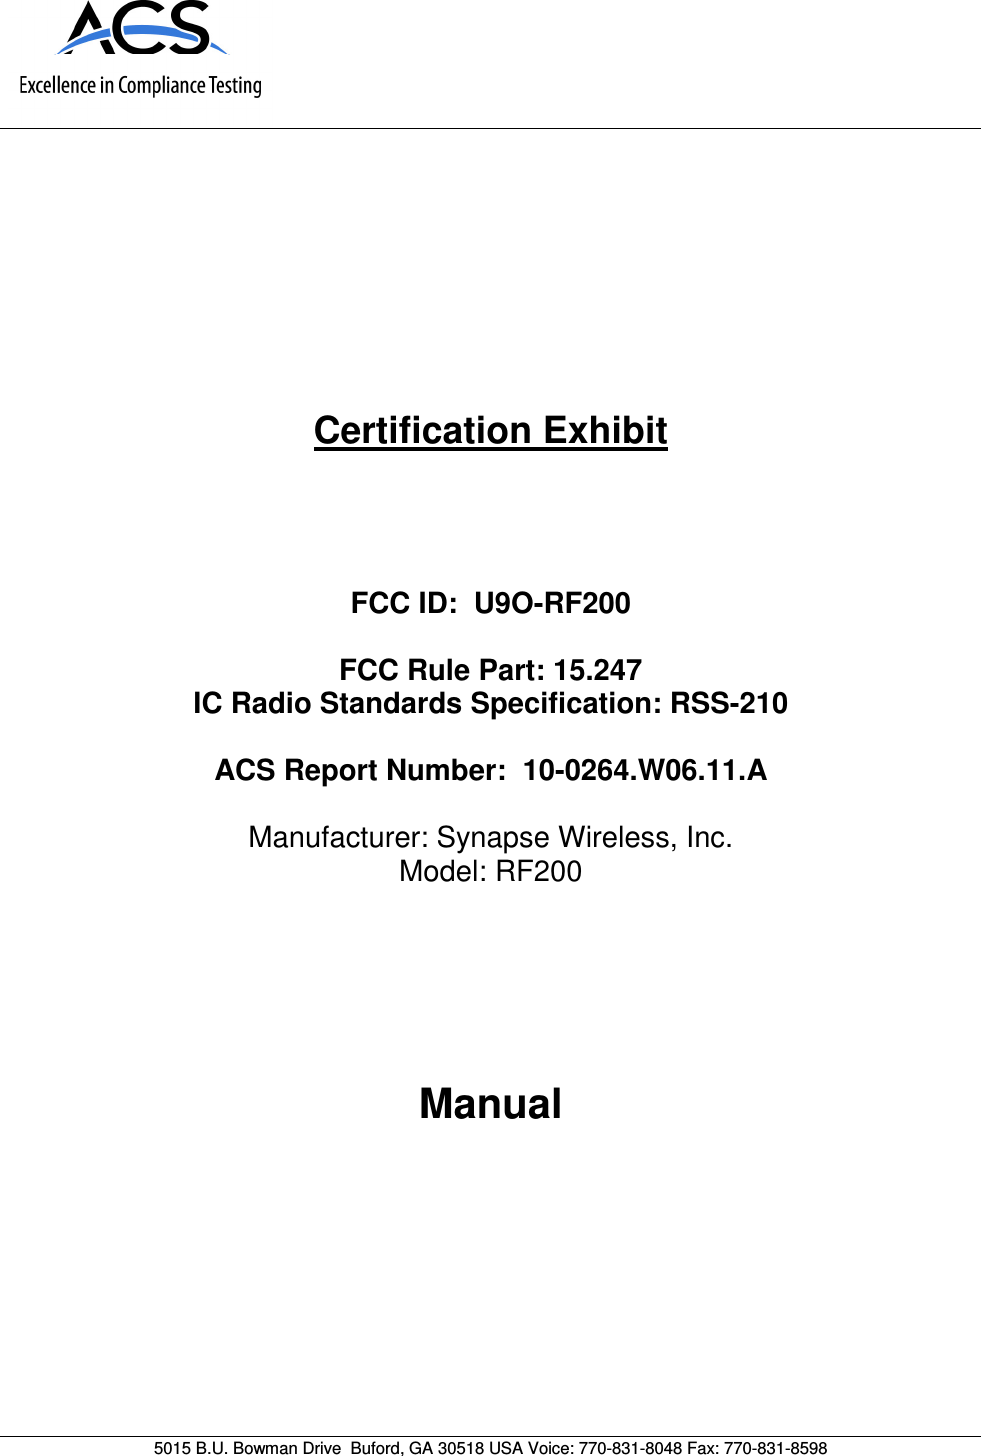      5015 B.U. Bowman Drive  Buford, GA 30518 USA Voice: 770-831-8048 Fax: 770-831-8598   Certification Exhibit     FCC ID:  U9O-RF200  FCC Rule Part: 15.247 IC Radio Standards Specification: RSS-210  ACS Report Number:  10-0264.W06.11.A   Manufacturer: Synapse Wireless, Inc. Model: RF200     Manual  